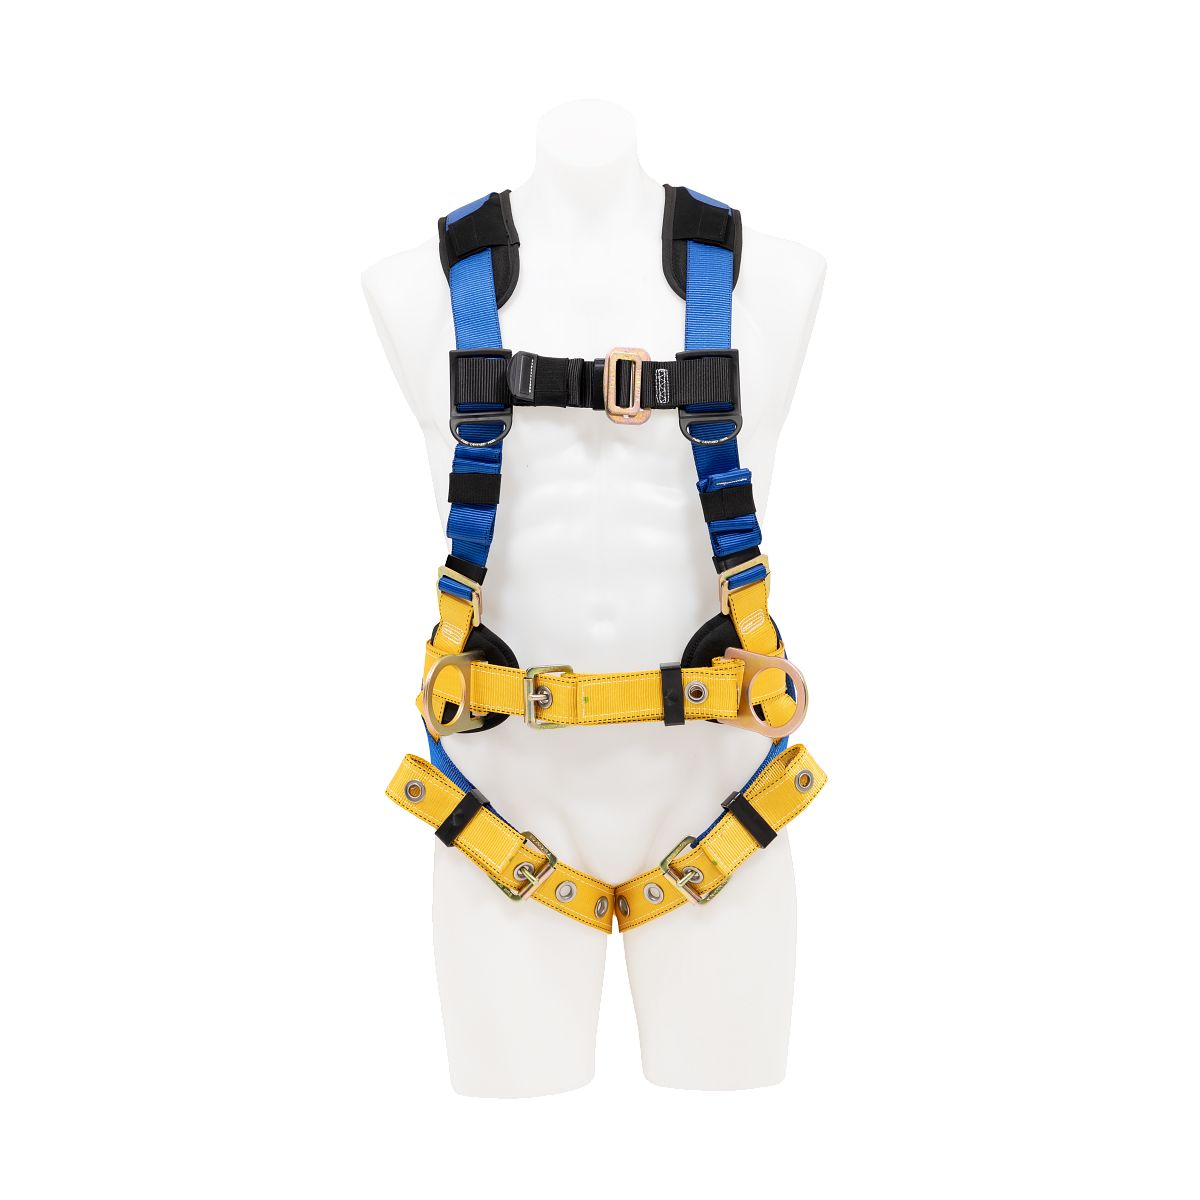 Werner BaseWear Construction Harness from Columbia Safety